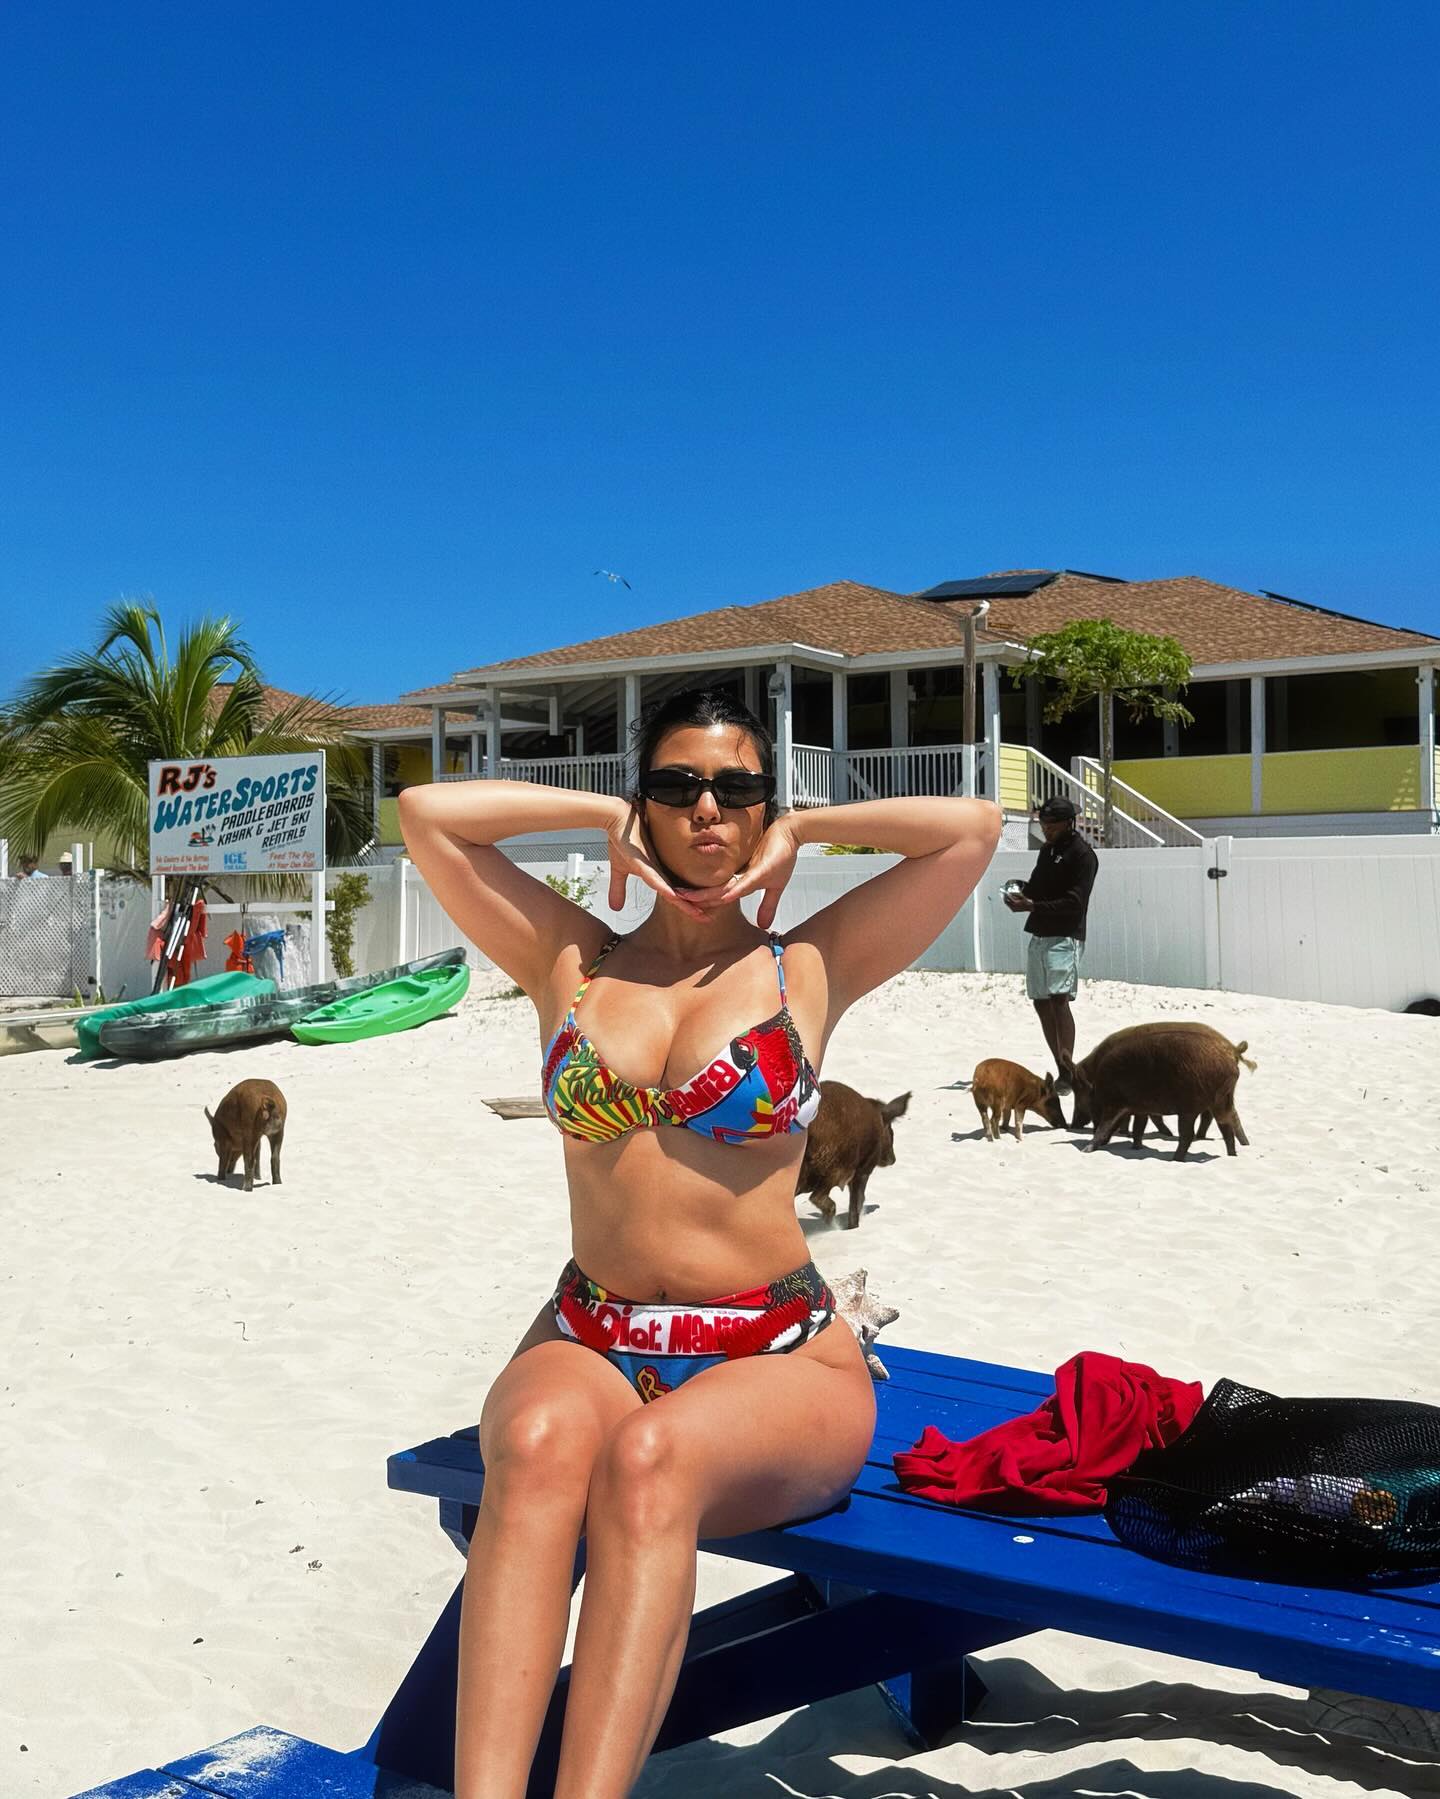 The star also enjoyed a birthday vacation, stunning fans with her bikini body